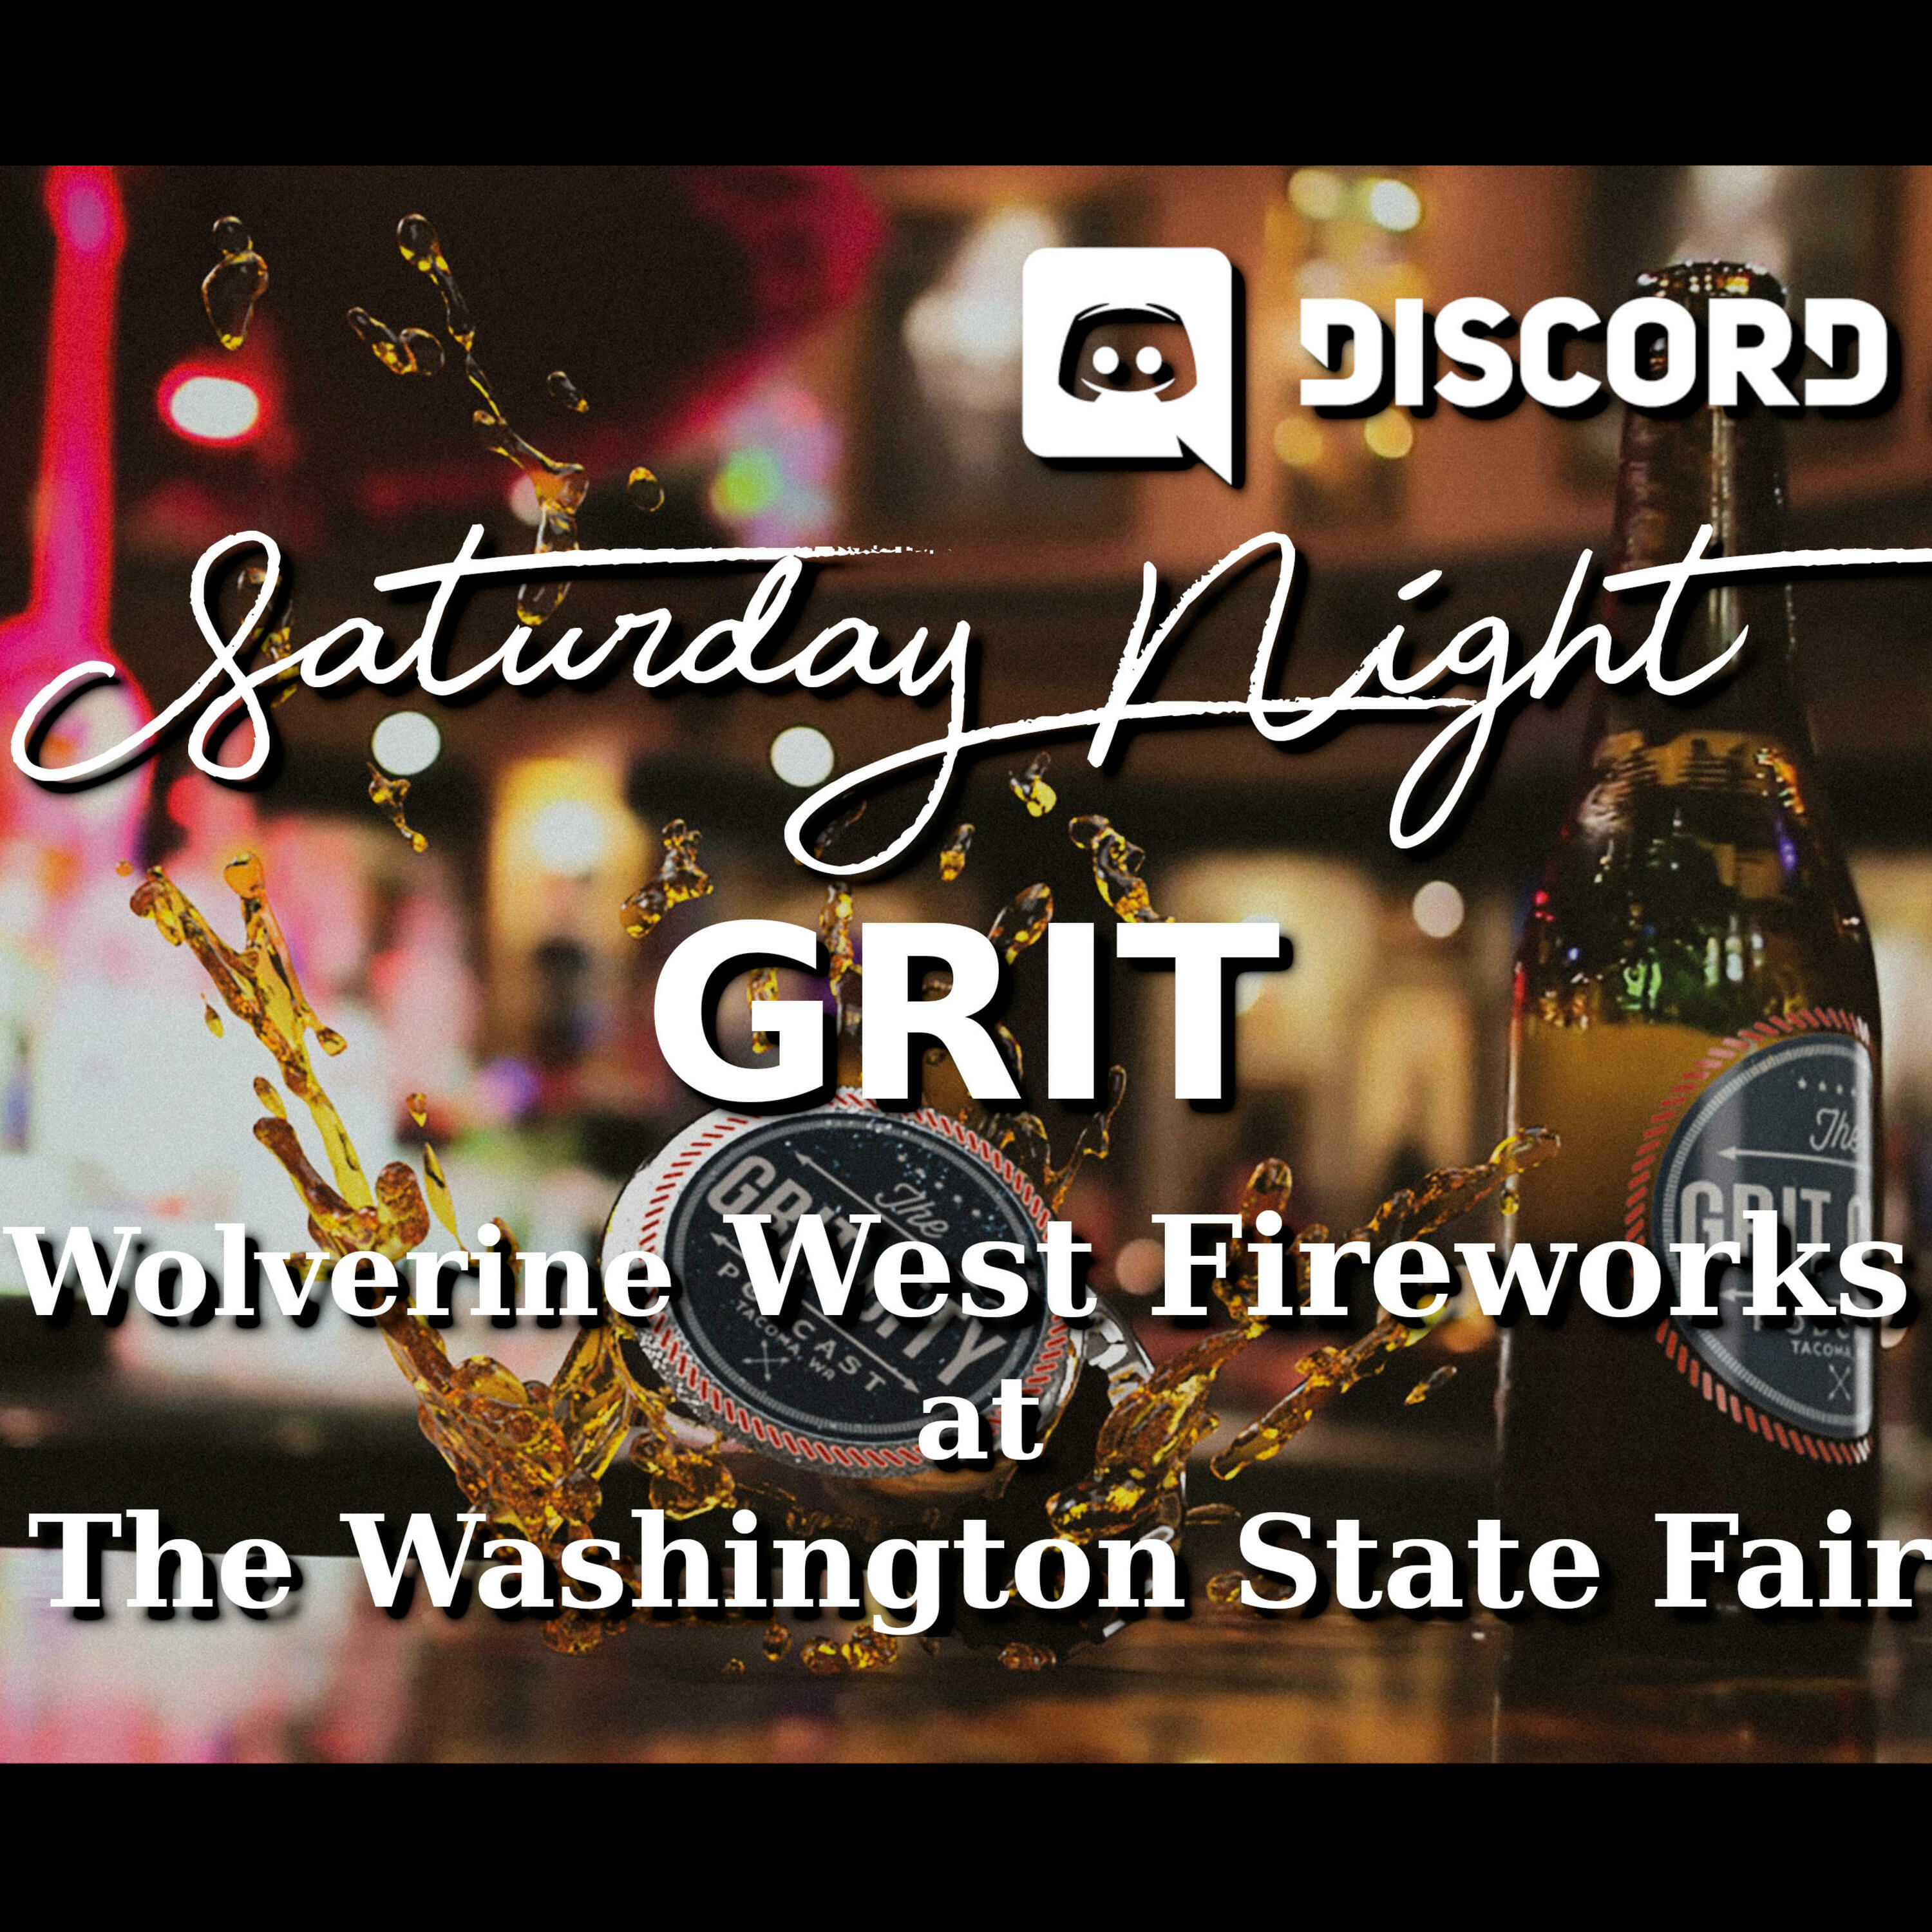 Saturday Night Grit - Wolverine West Fireworks At The Washington State Fair